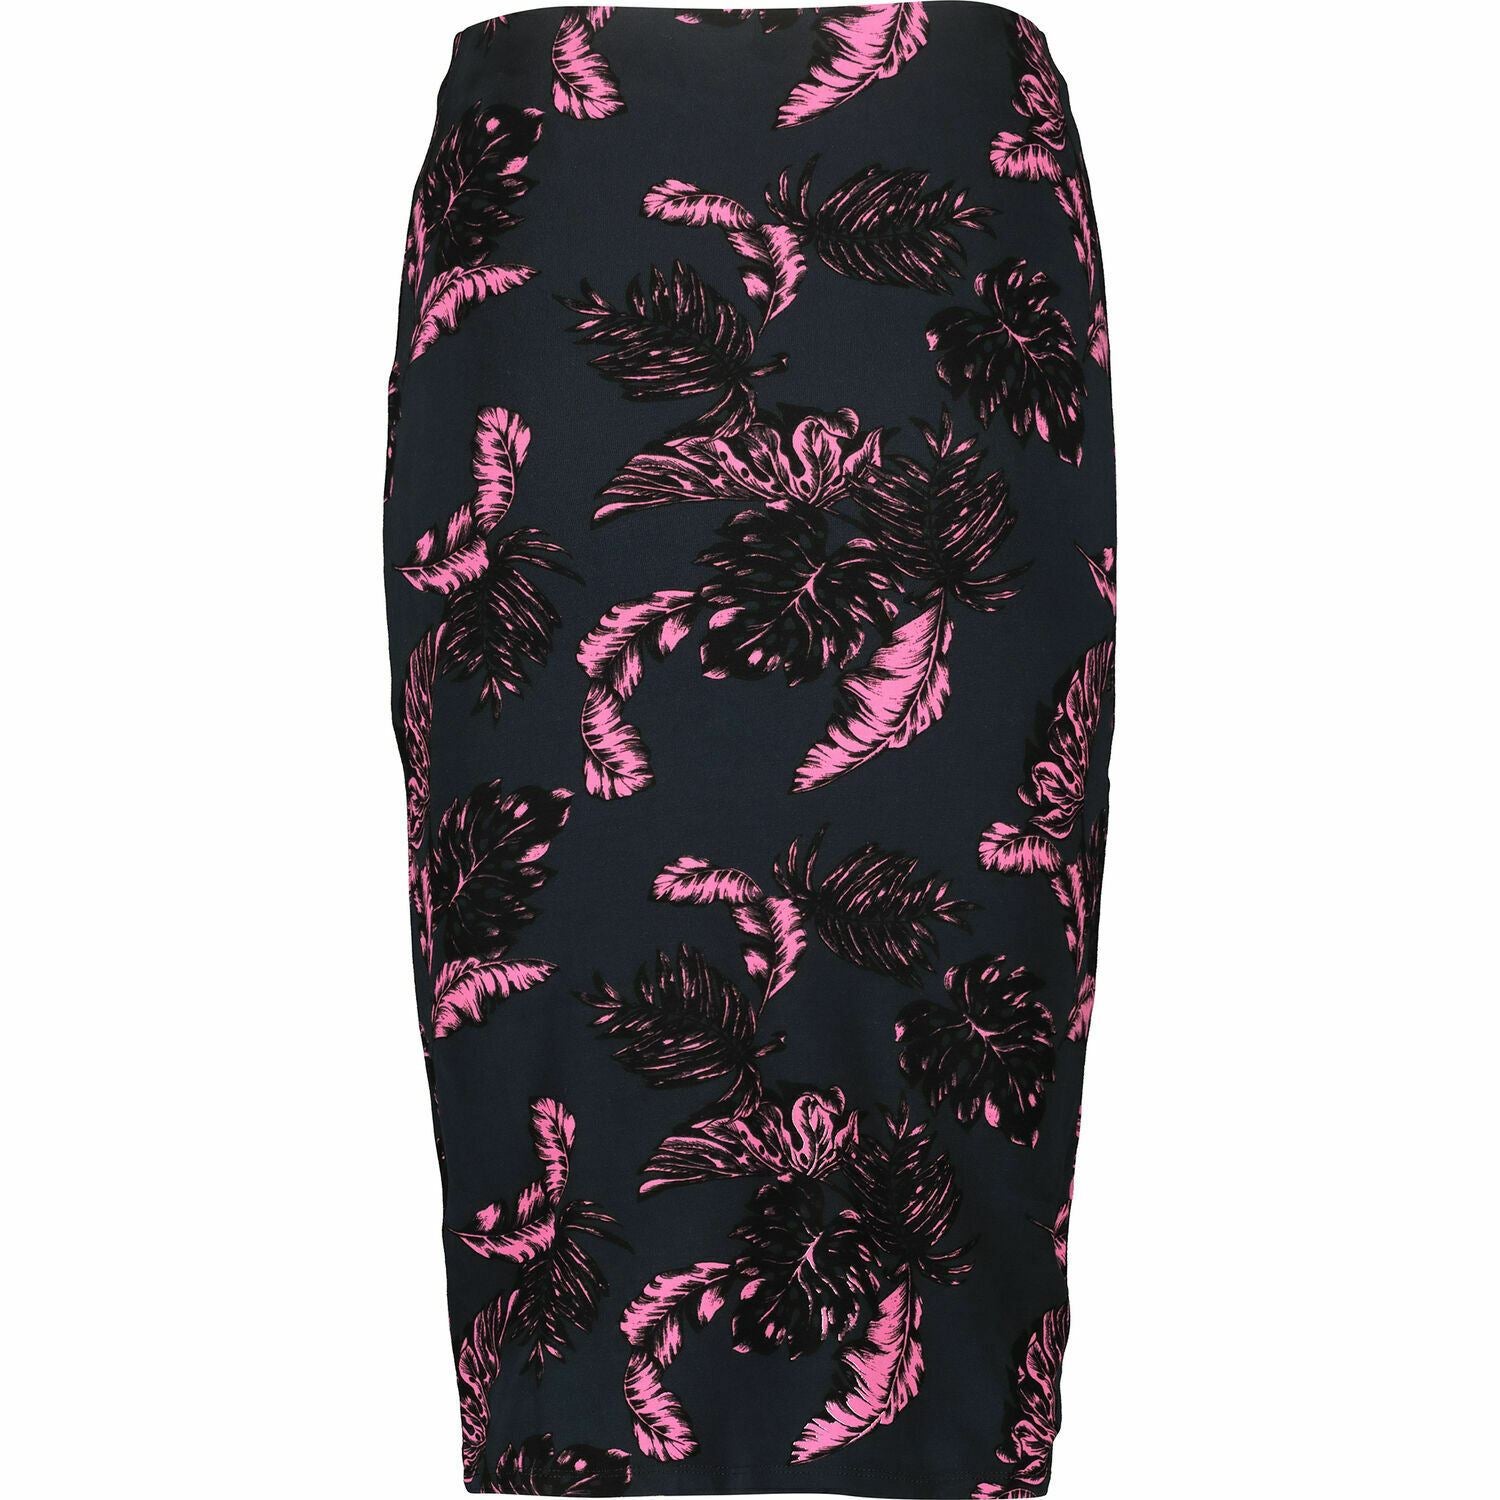 SUPERDRY Women's Beach Leaf Pencil Skirt, Tropical Navy / Pink, size M - UK 12